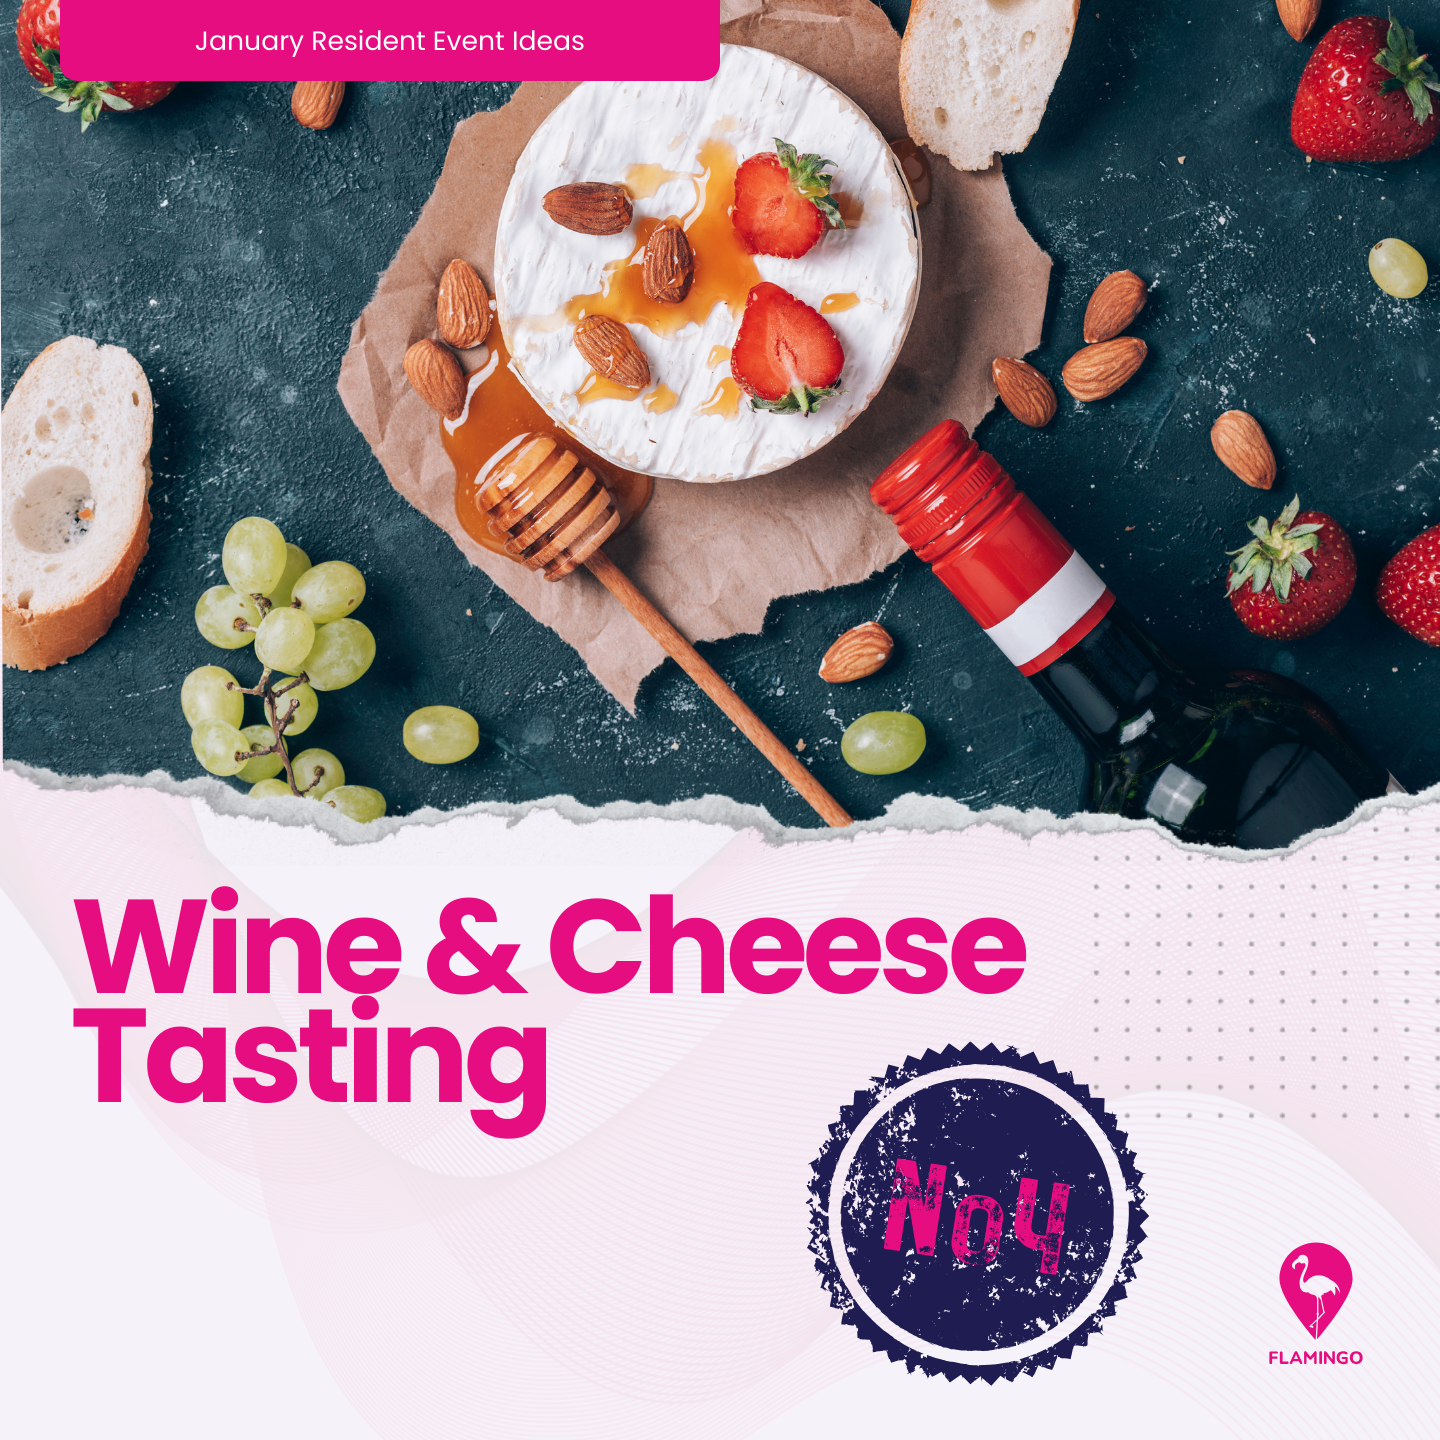 Wine & Cheese Tasting | January Resident Event Ideas